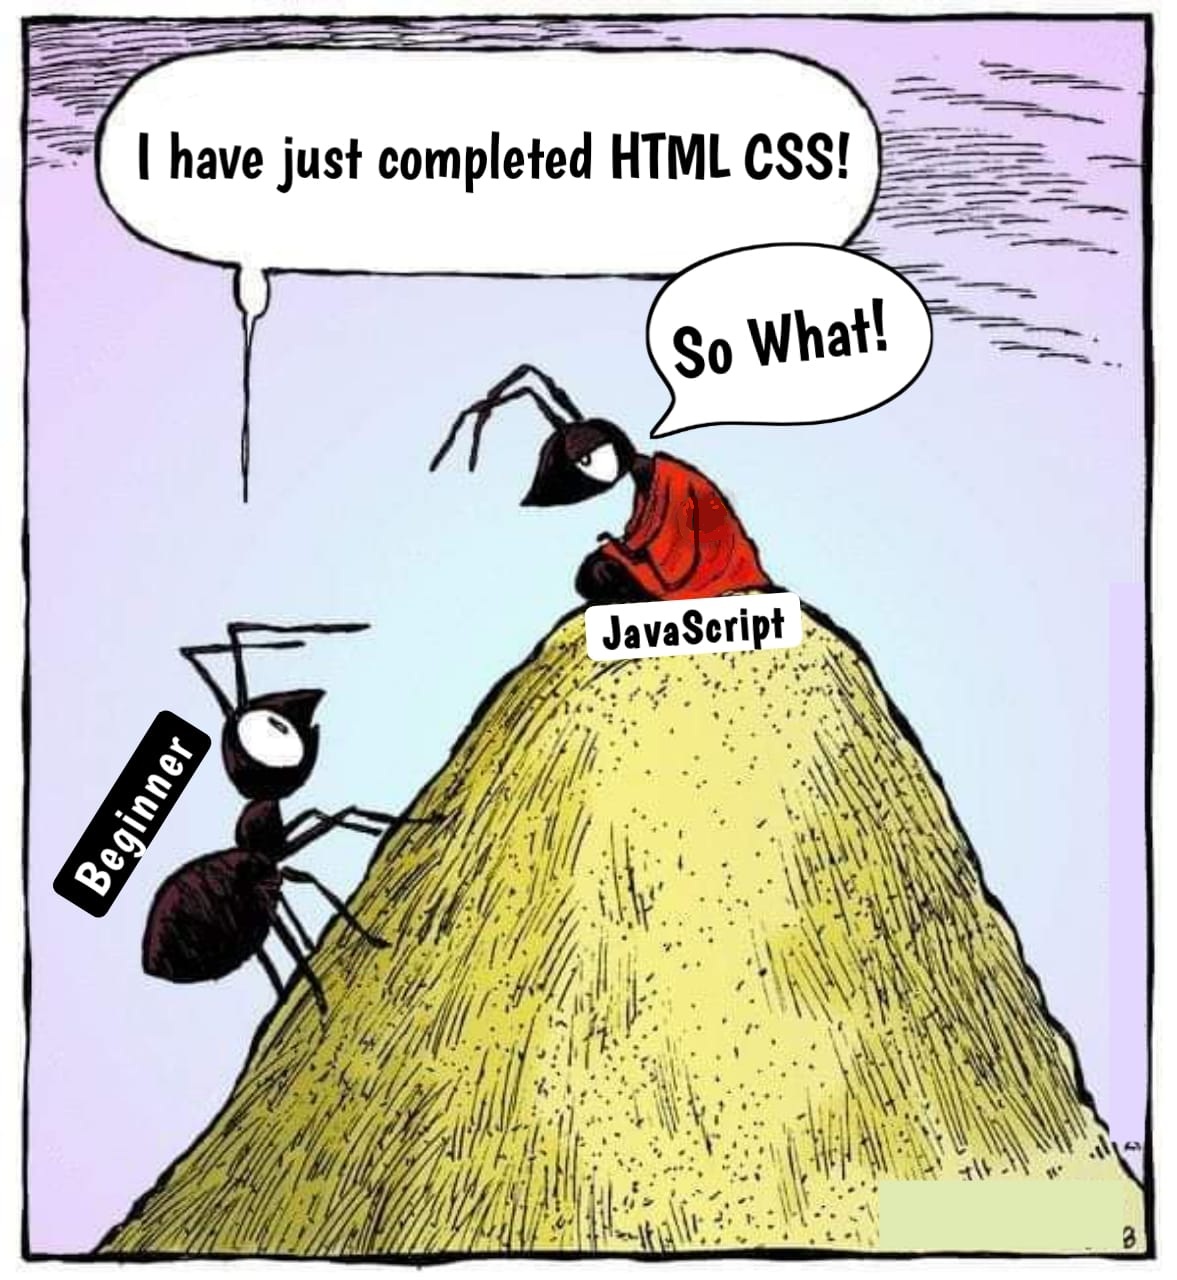 I have just completed HTML CSS!